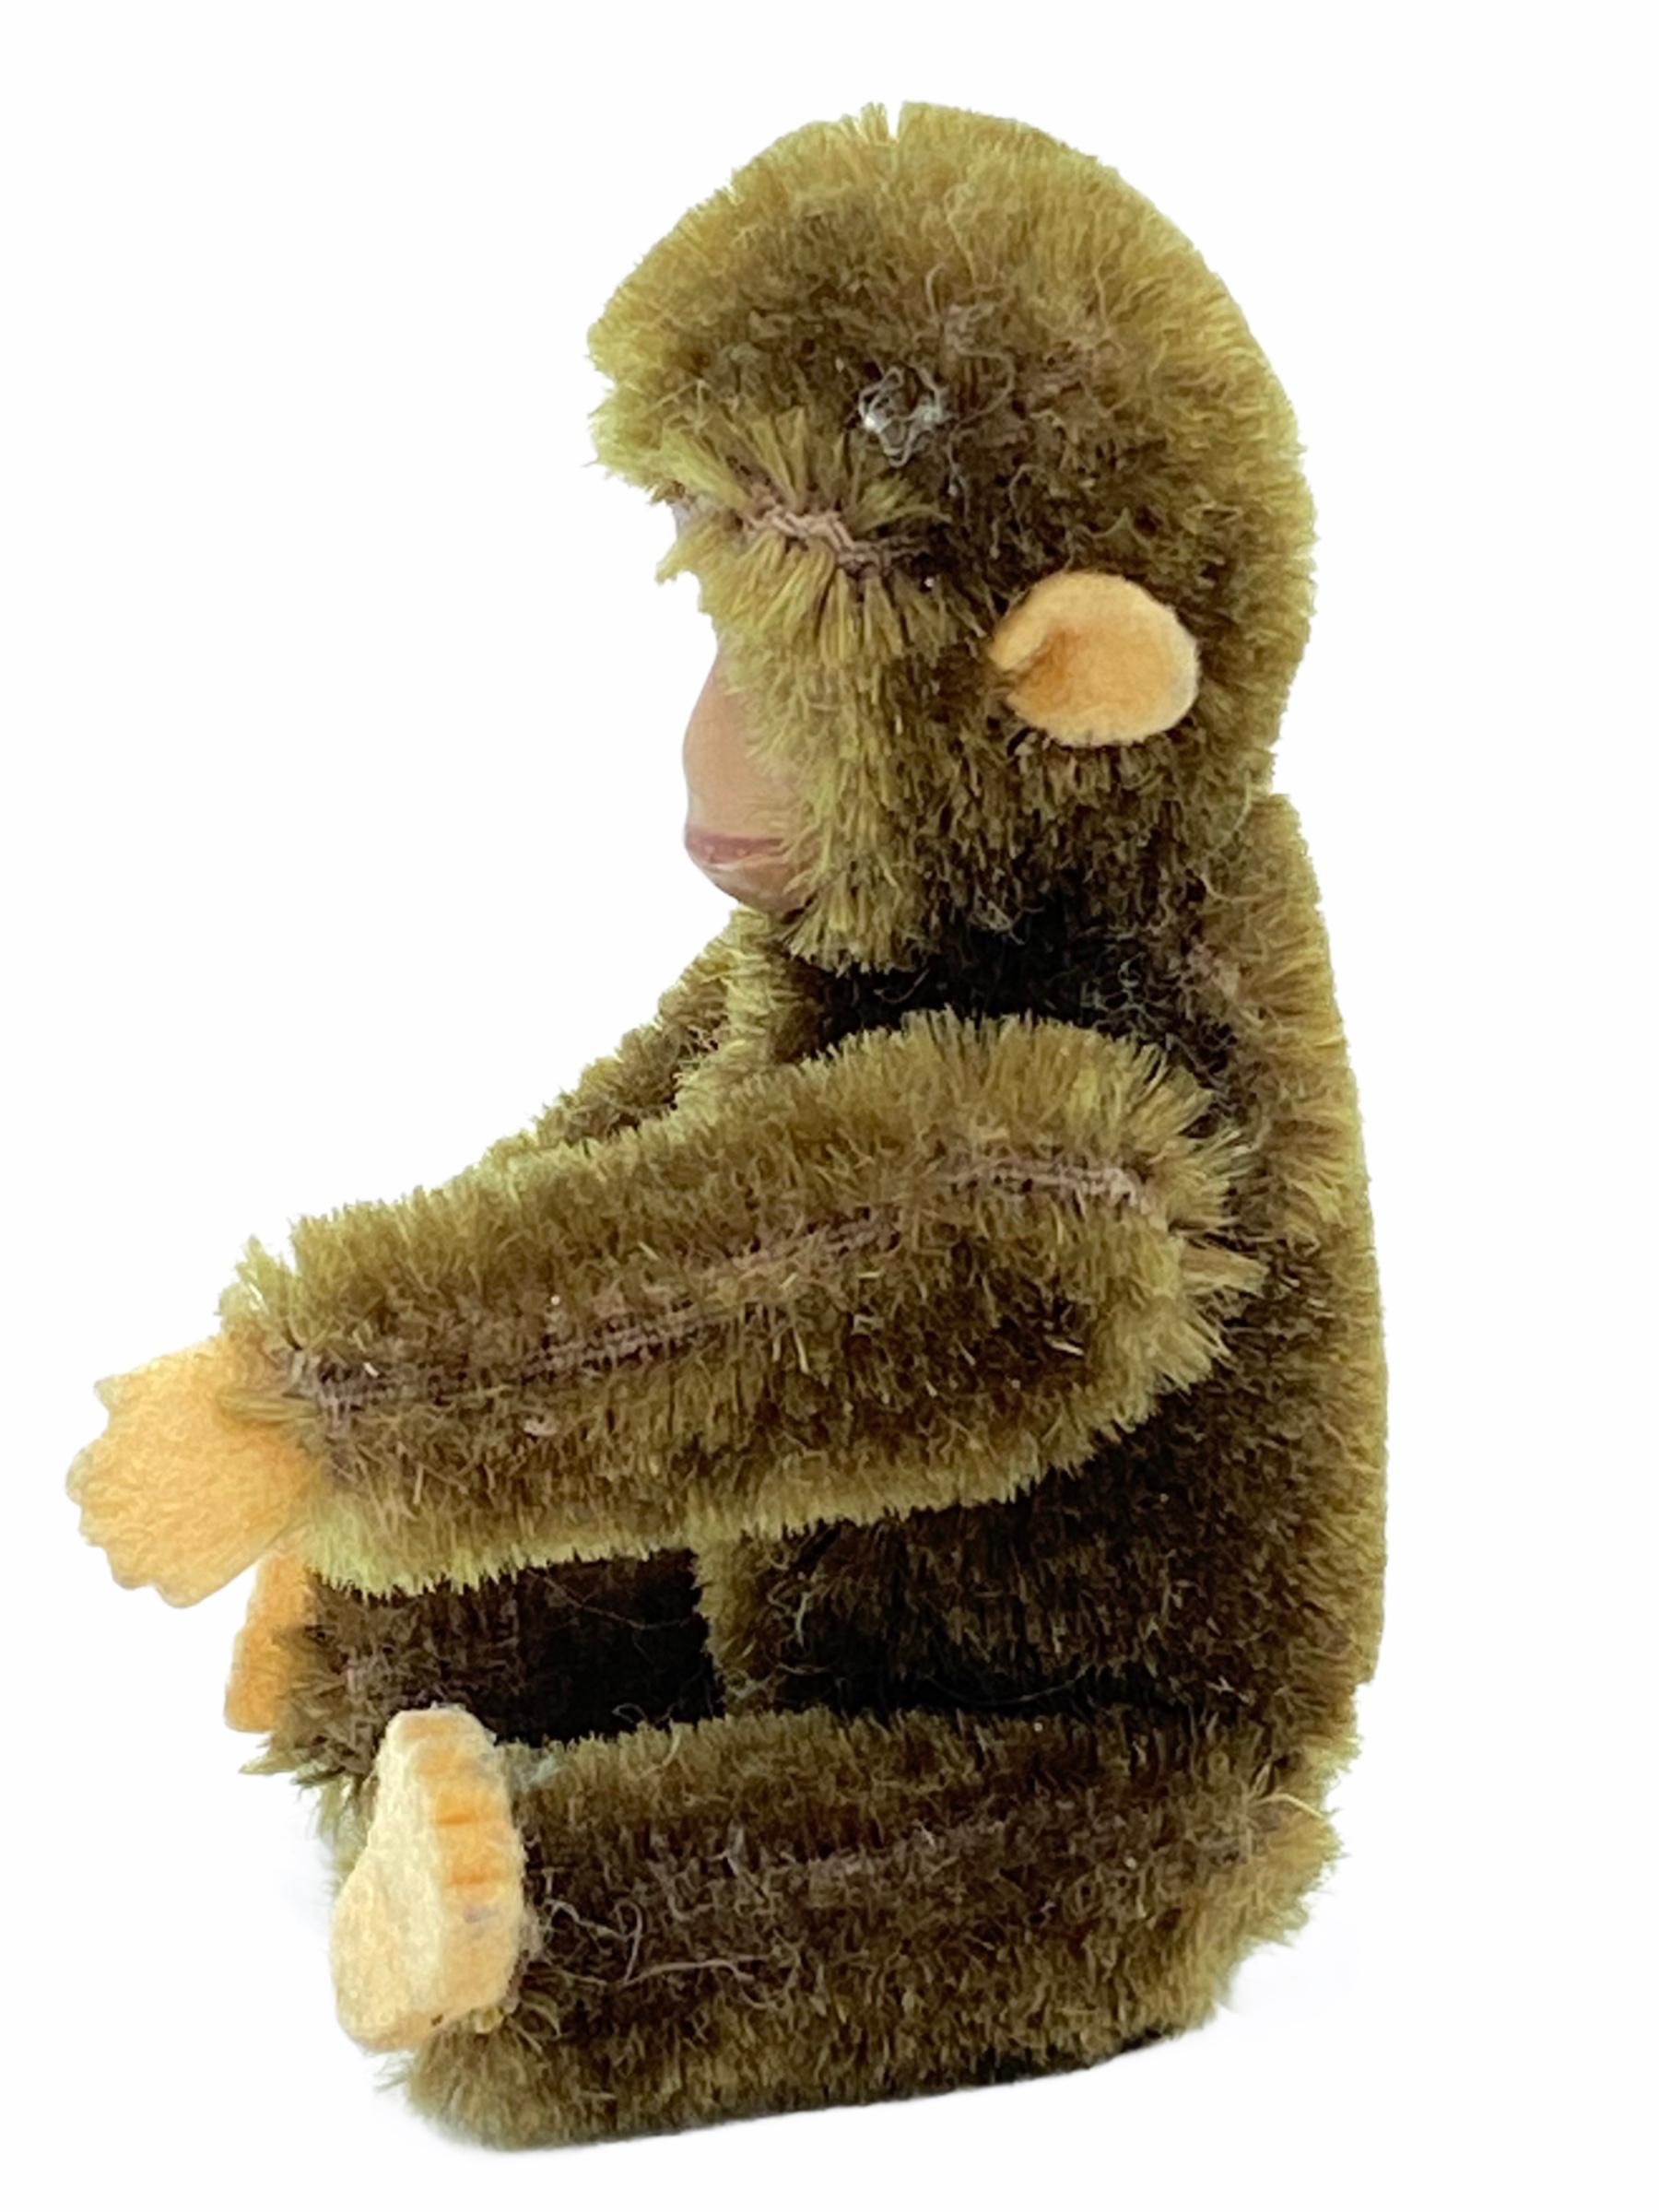 Very nice circa 1930s Schuco monkey with a striking painted metal face. Arms legs move and the head can turn left and right. Felt ears, hands and feet. Made in Germany by the famous Schuco Toy Company. It is in very good condition.